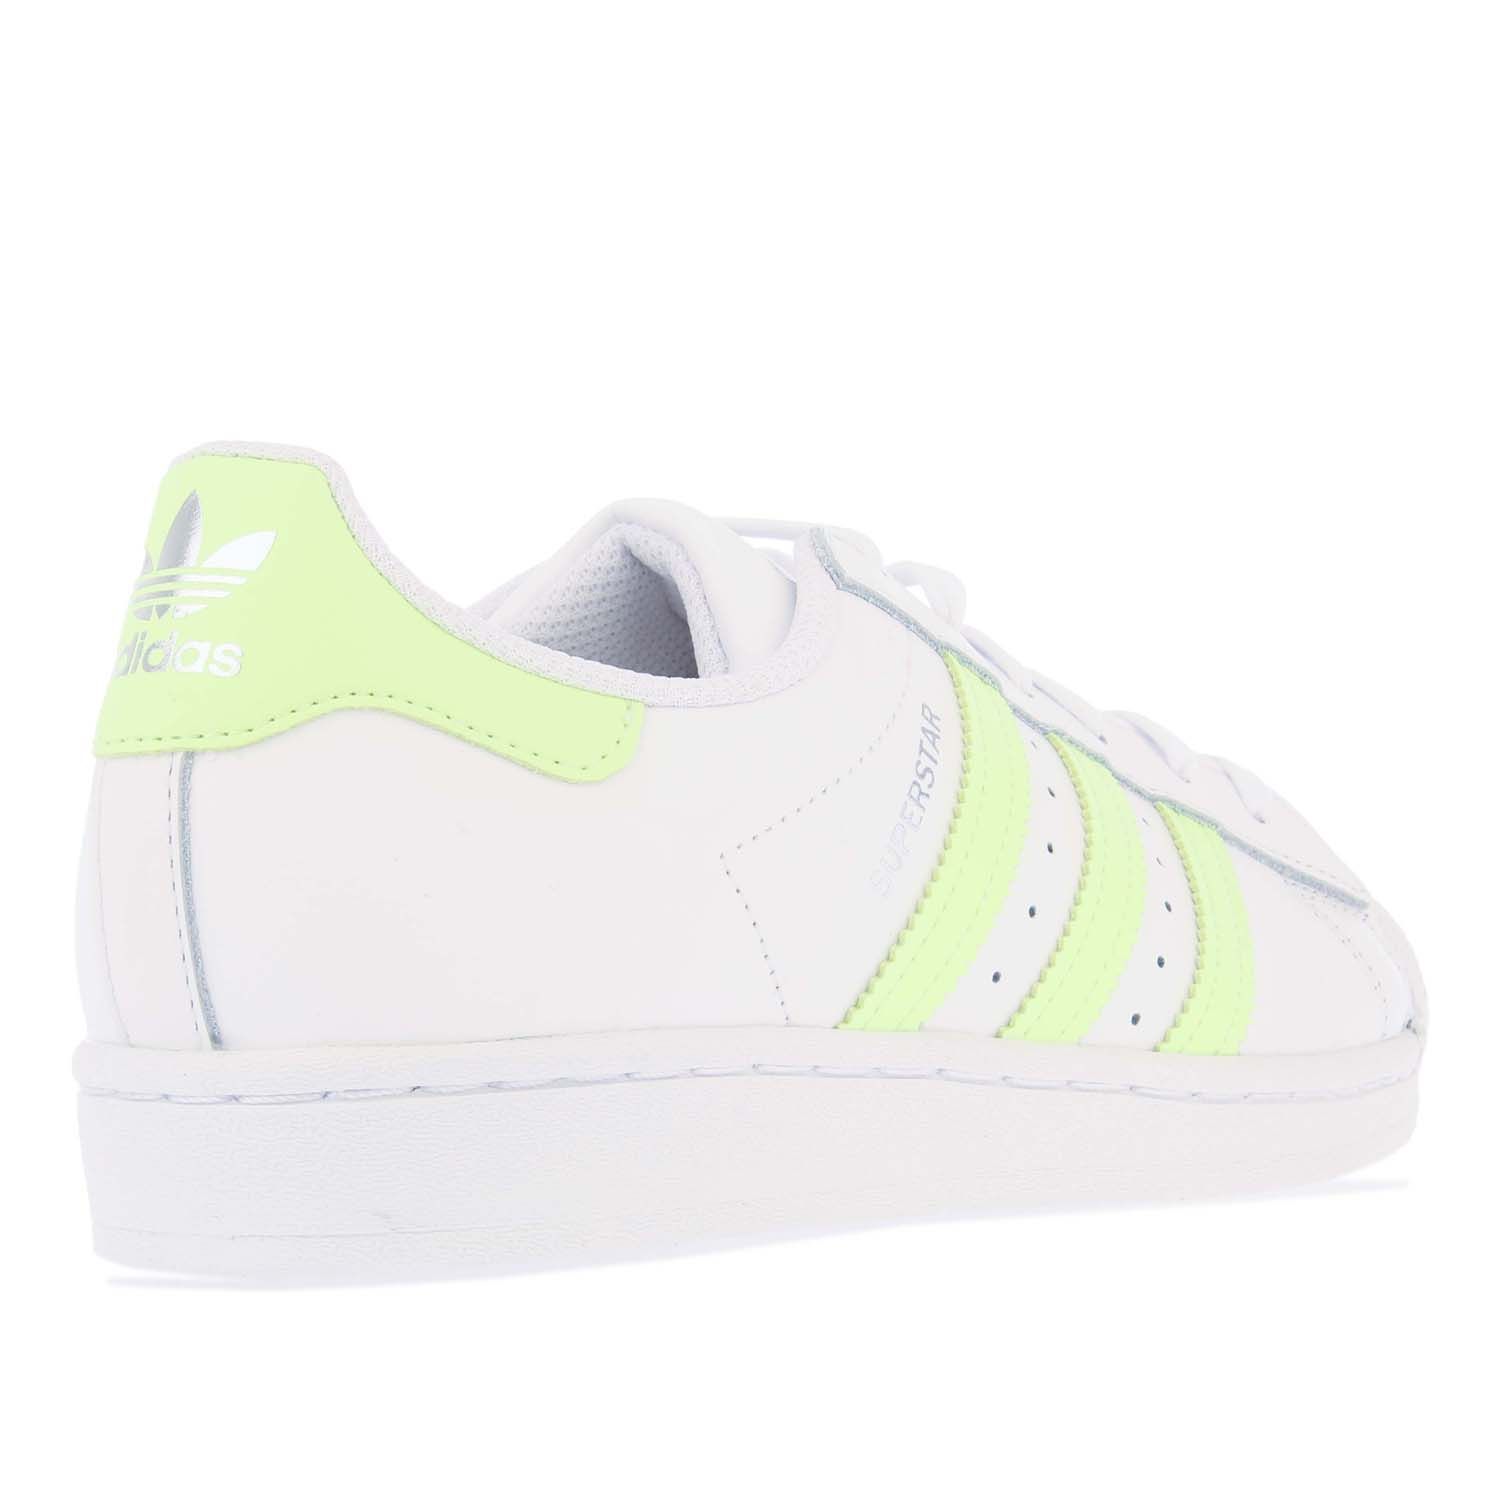 Womens adidas Originals Superstar Trainers in white yellow.- Leather upper.- Lace closure.- Regular fit.- Moulded sockliner.- Serrated 3-Stripes.- Trefoil logos to the tongue and heel. - Rubber sole. - Leather upper  Textile lining.- Ref.: FX6090